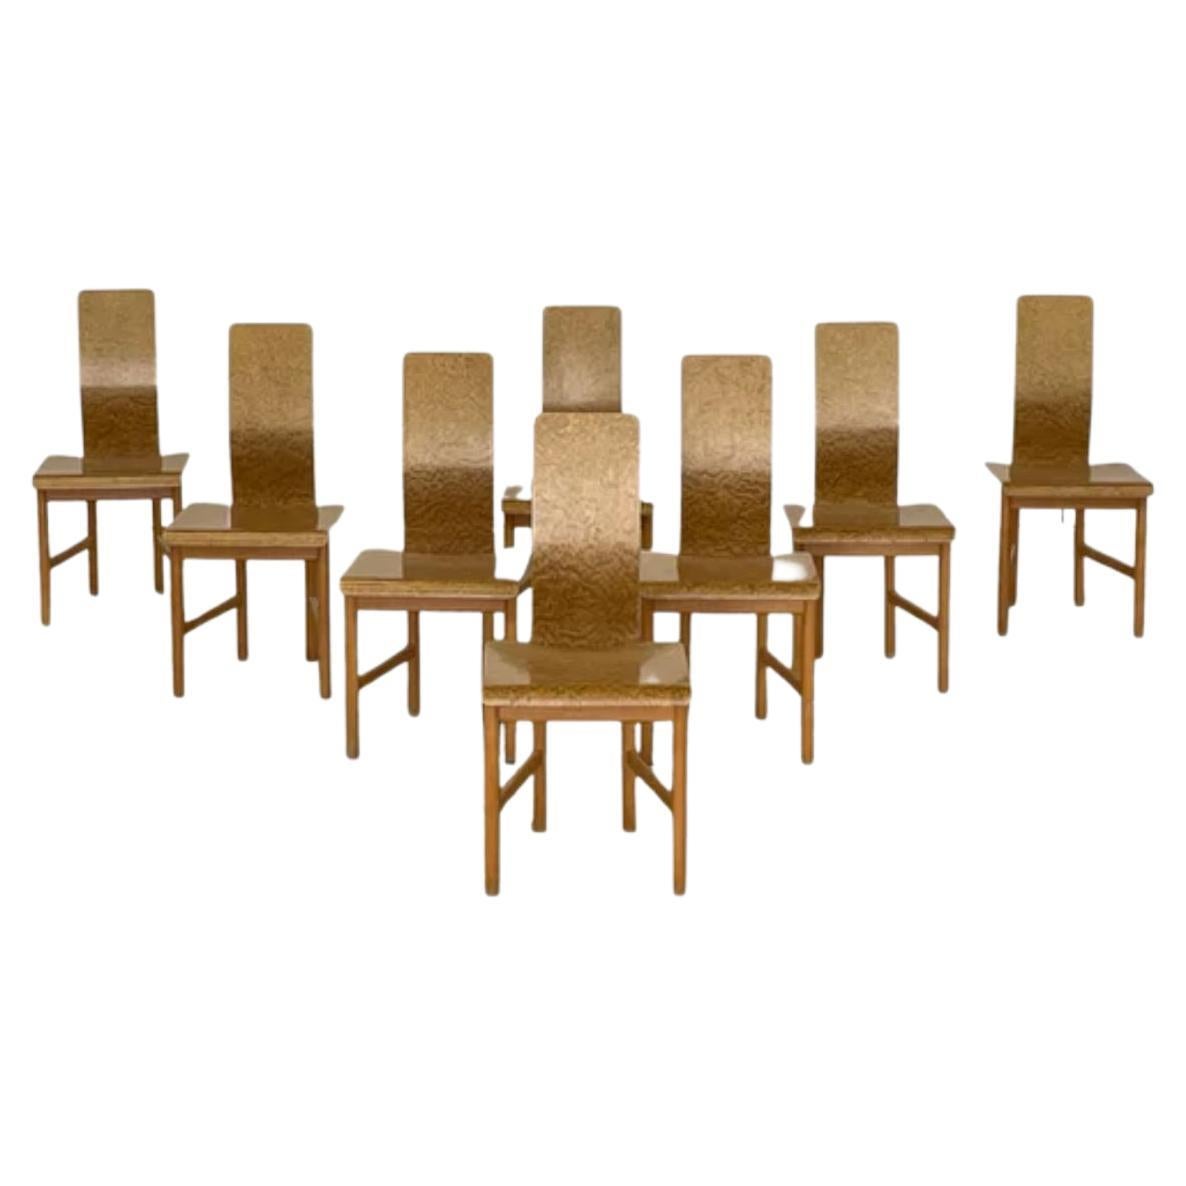 Set of 8 “Vela” Dining Chairs in Burlwood by Enzo Mari, Driade, Italy, 1977 For Sale